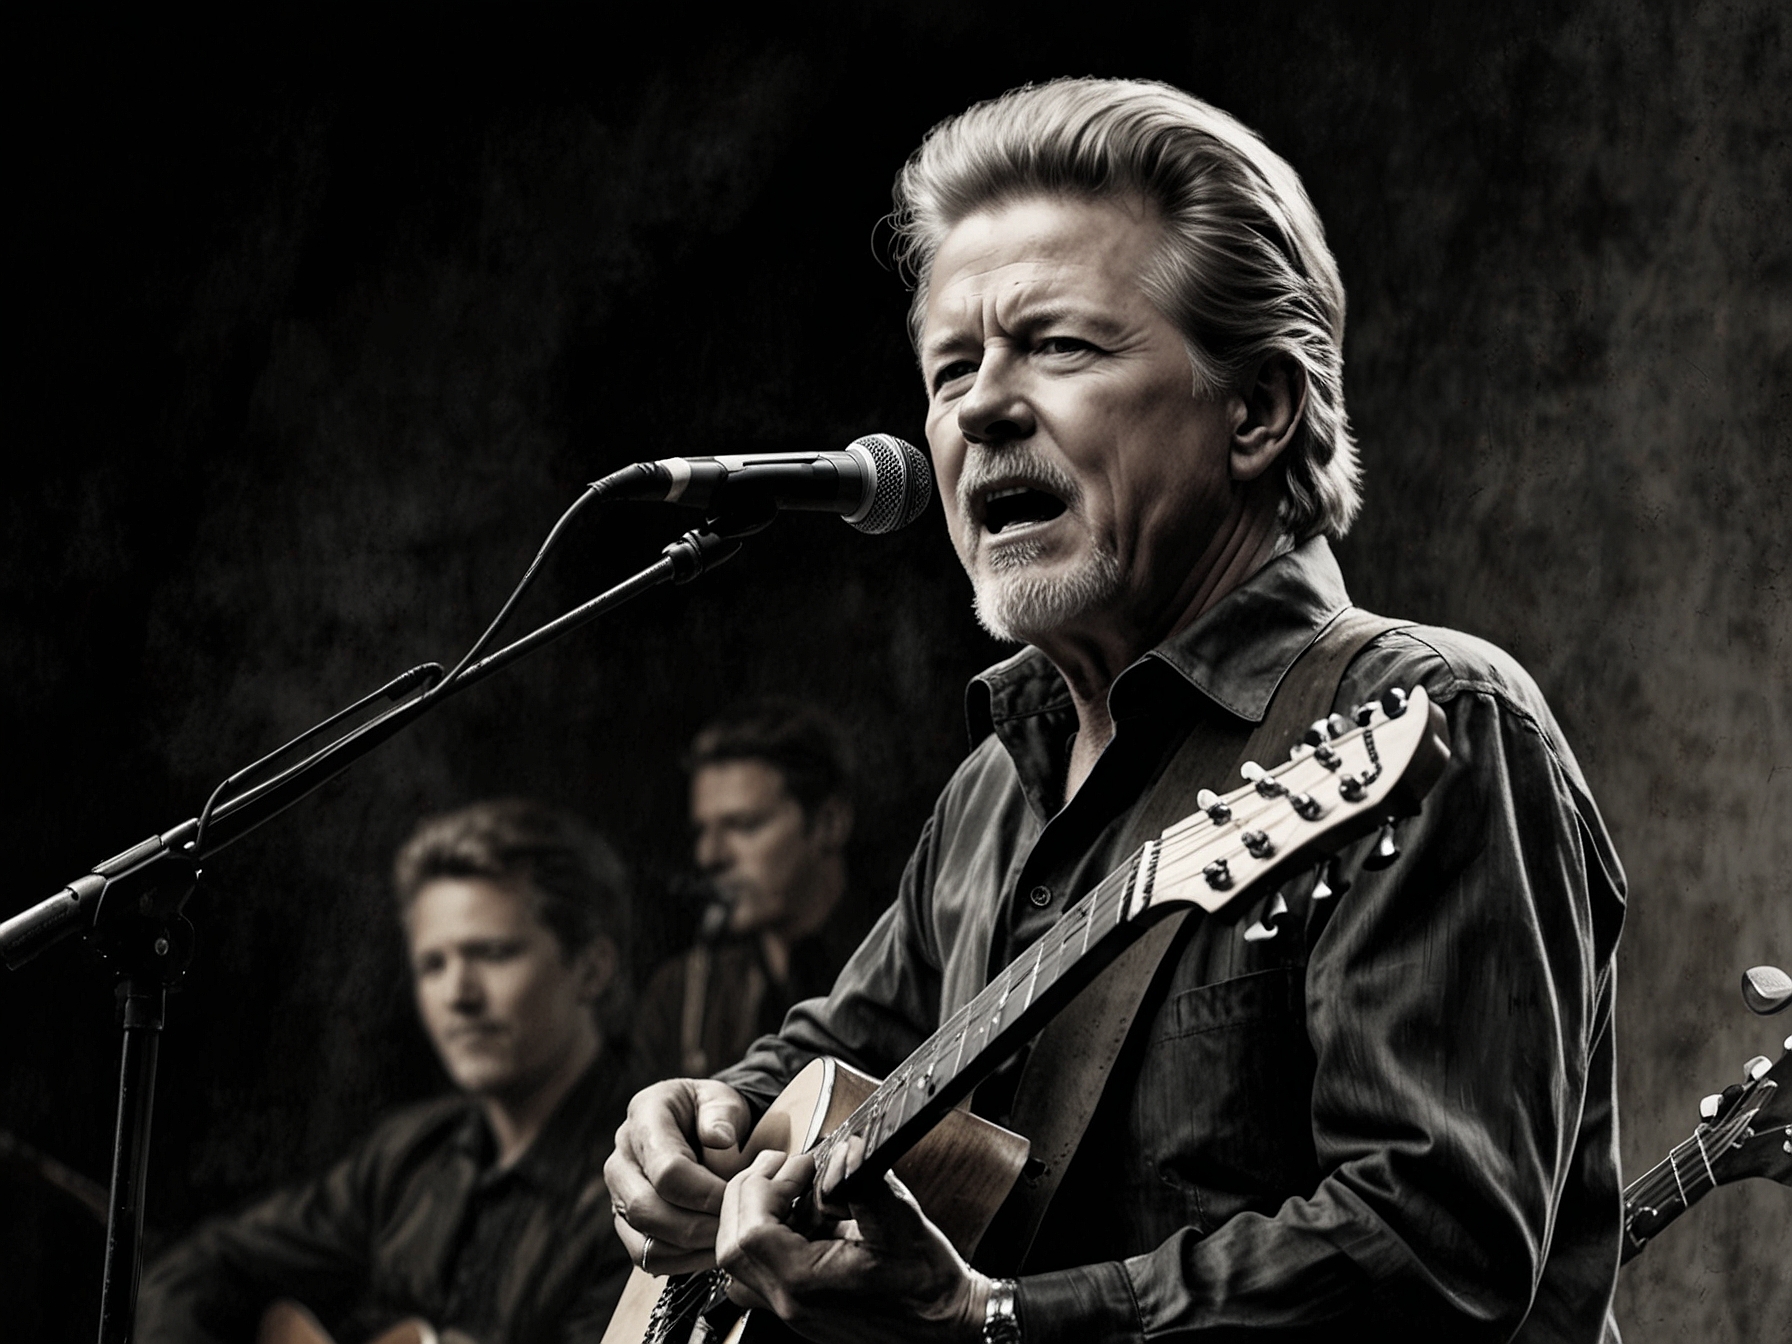 An image depicting Don Henley performing live, emphasizing his enduring influence and presence in the rock music scene.